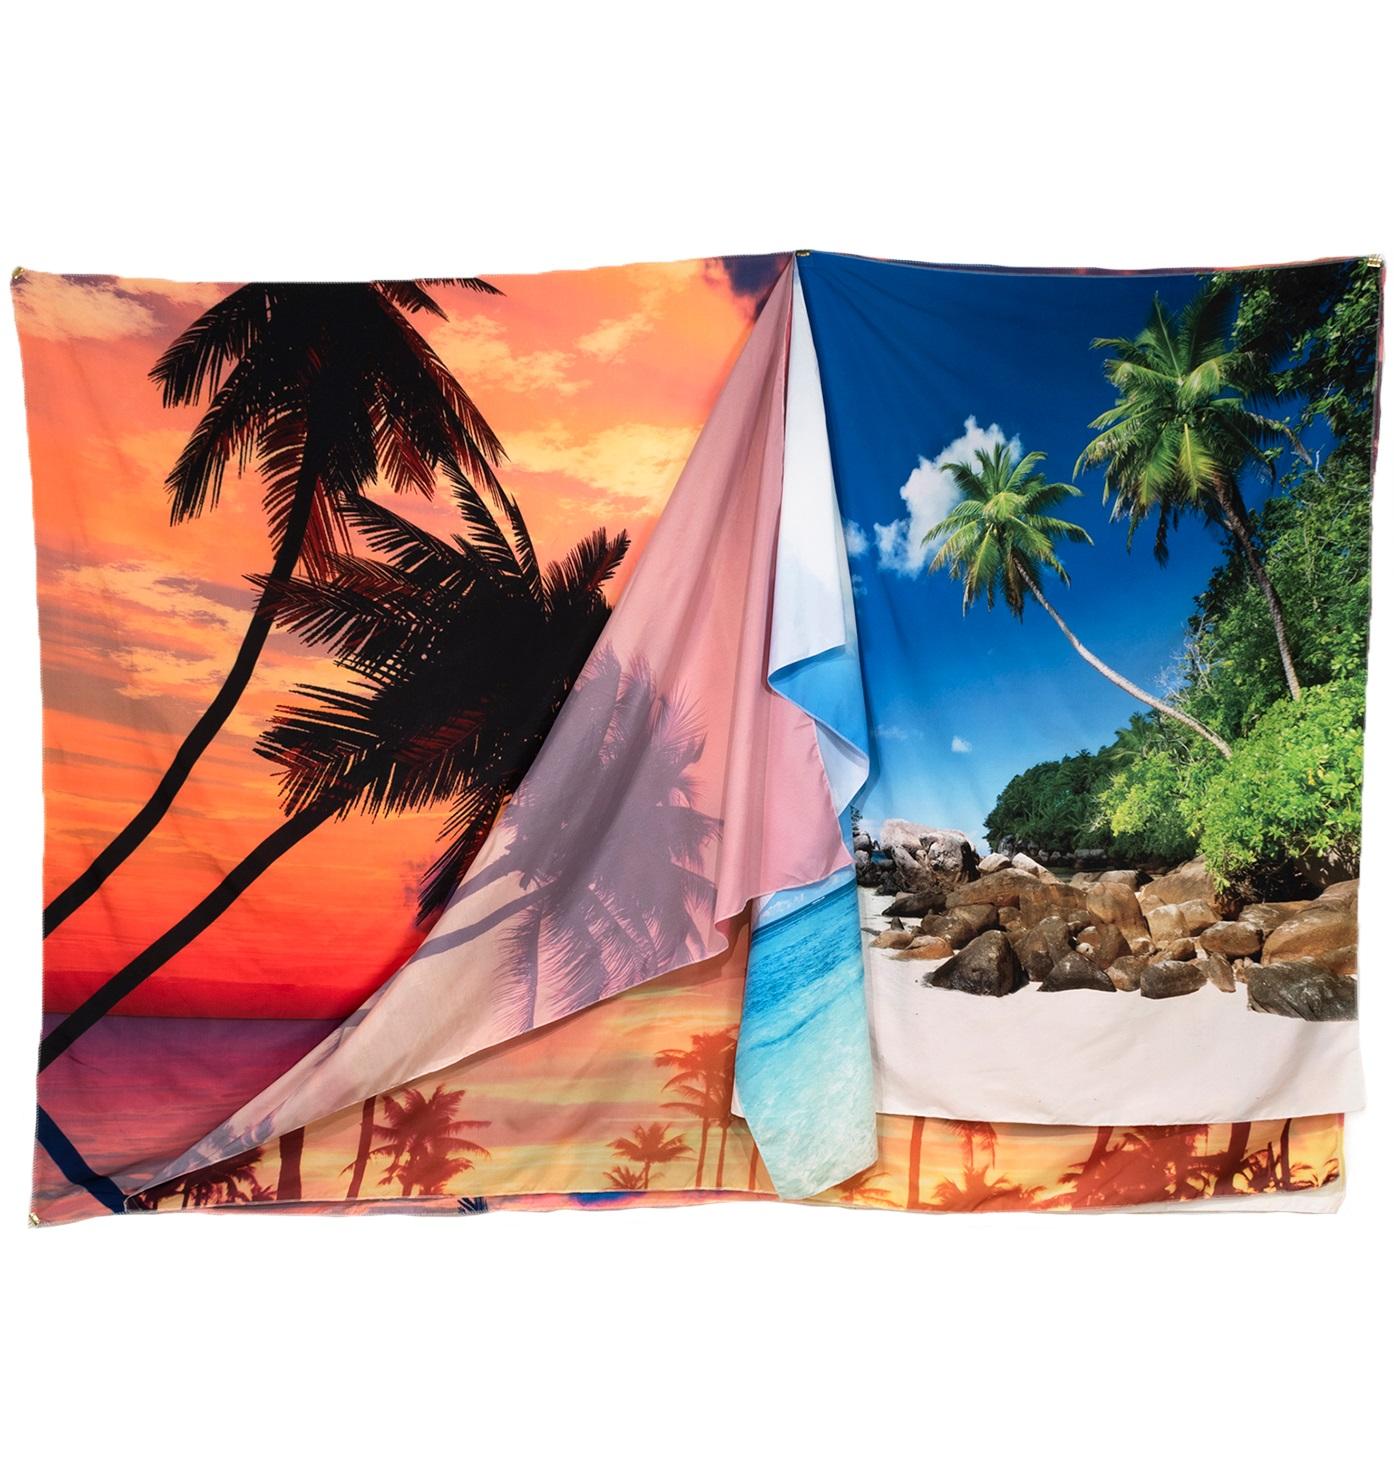 McLean Fahnestock Landscape Photograph - AS FAR AS A VIEW - Folded Tapestry Collage of Scenic Landscapes w/ Palm Trees